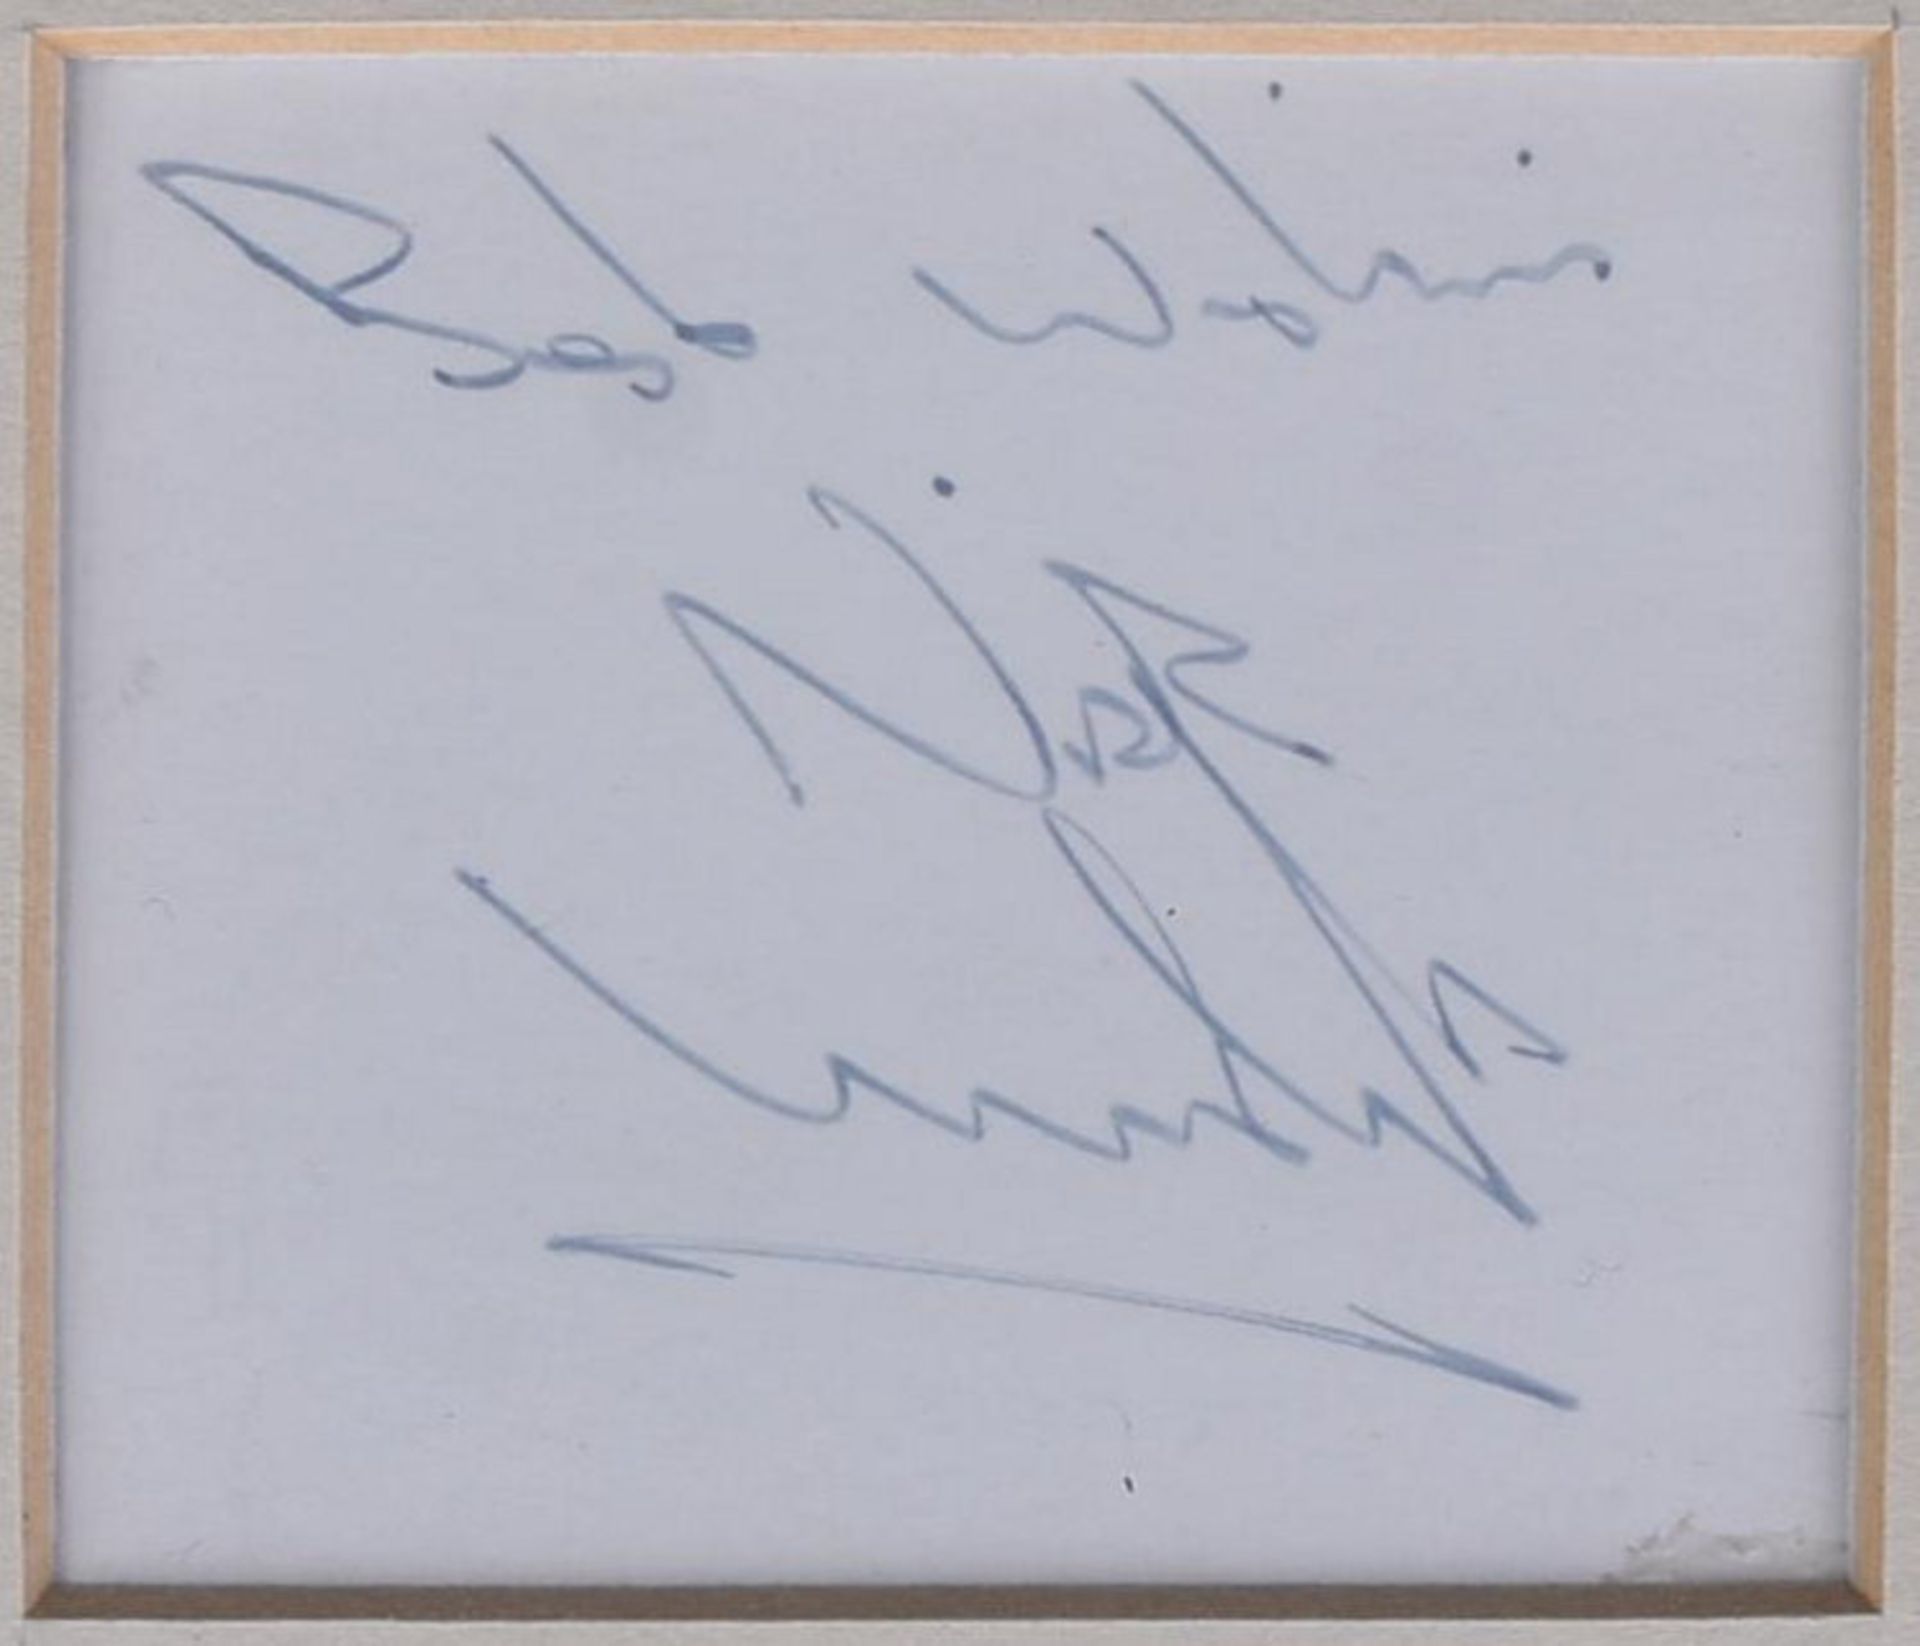 ONLY FOOLS & HORSES - TRIPLE SIGNED AUTOGRAPH PRESENTATION - Image 4 of 6